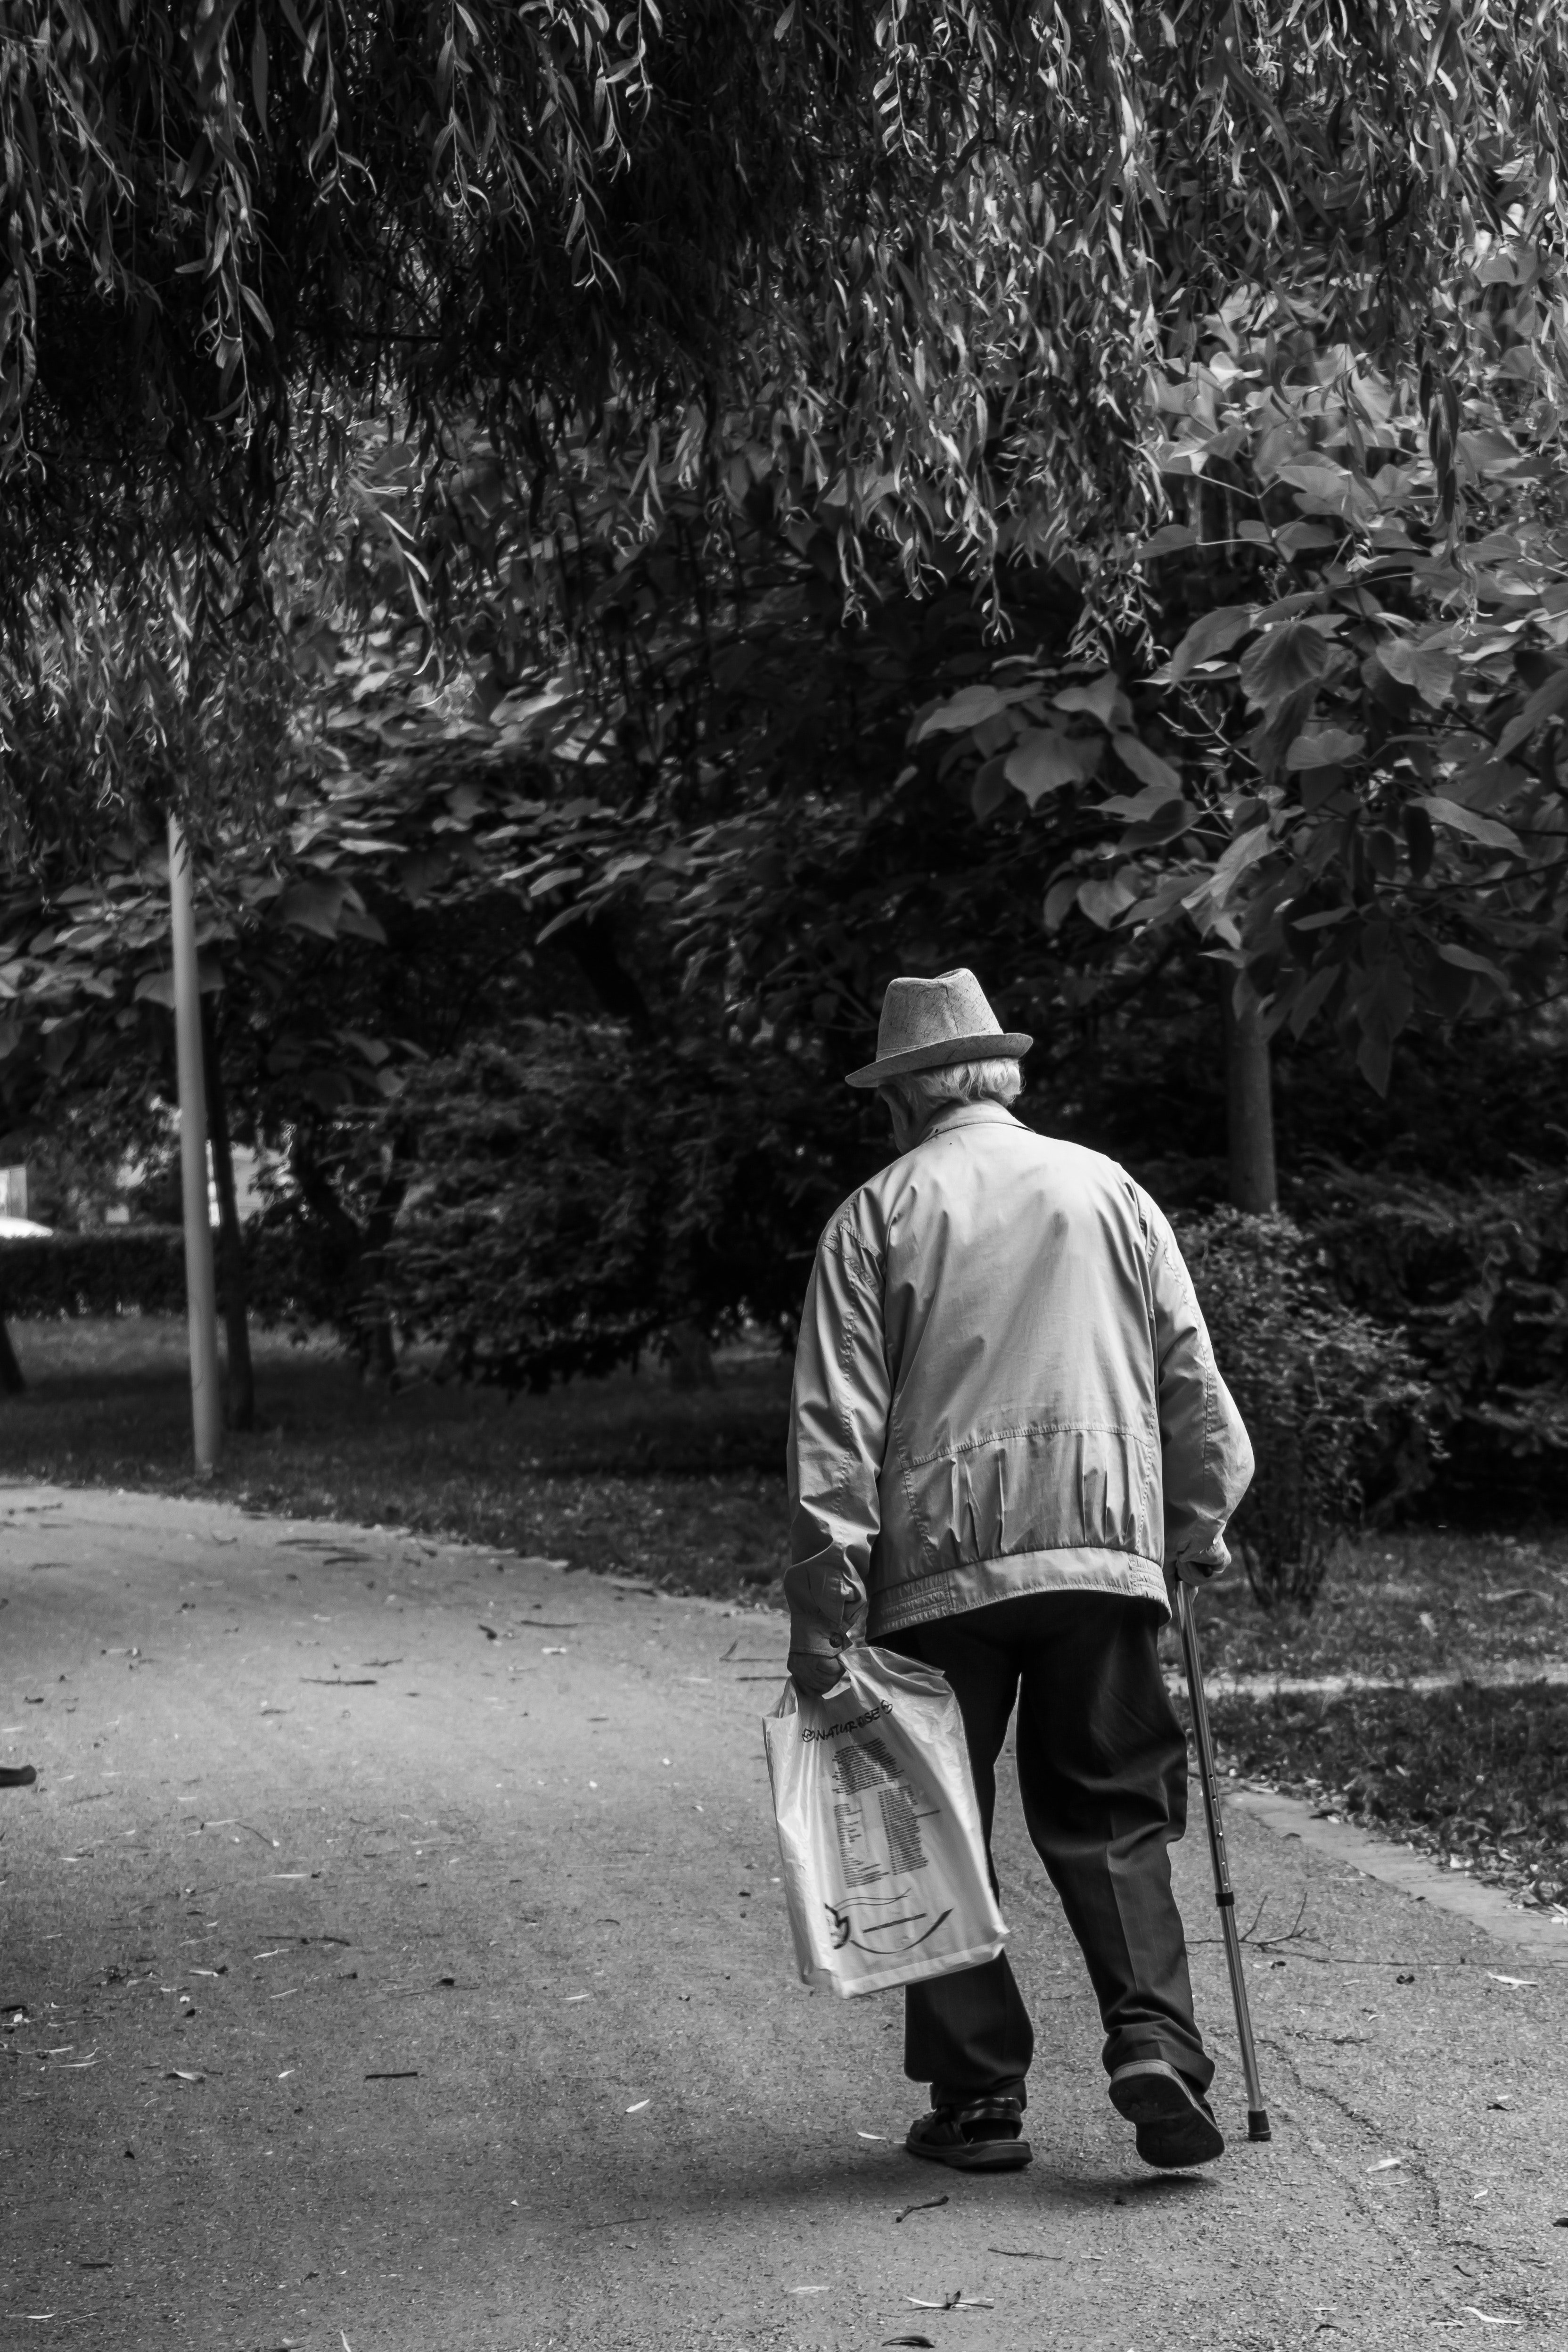 An old man walked four miles to get to the post office to deliver a gift. | Source: Pexels